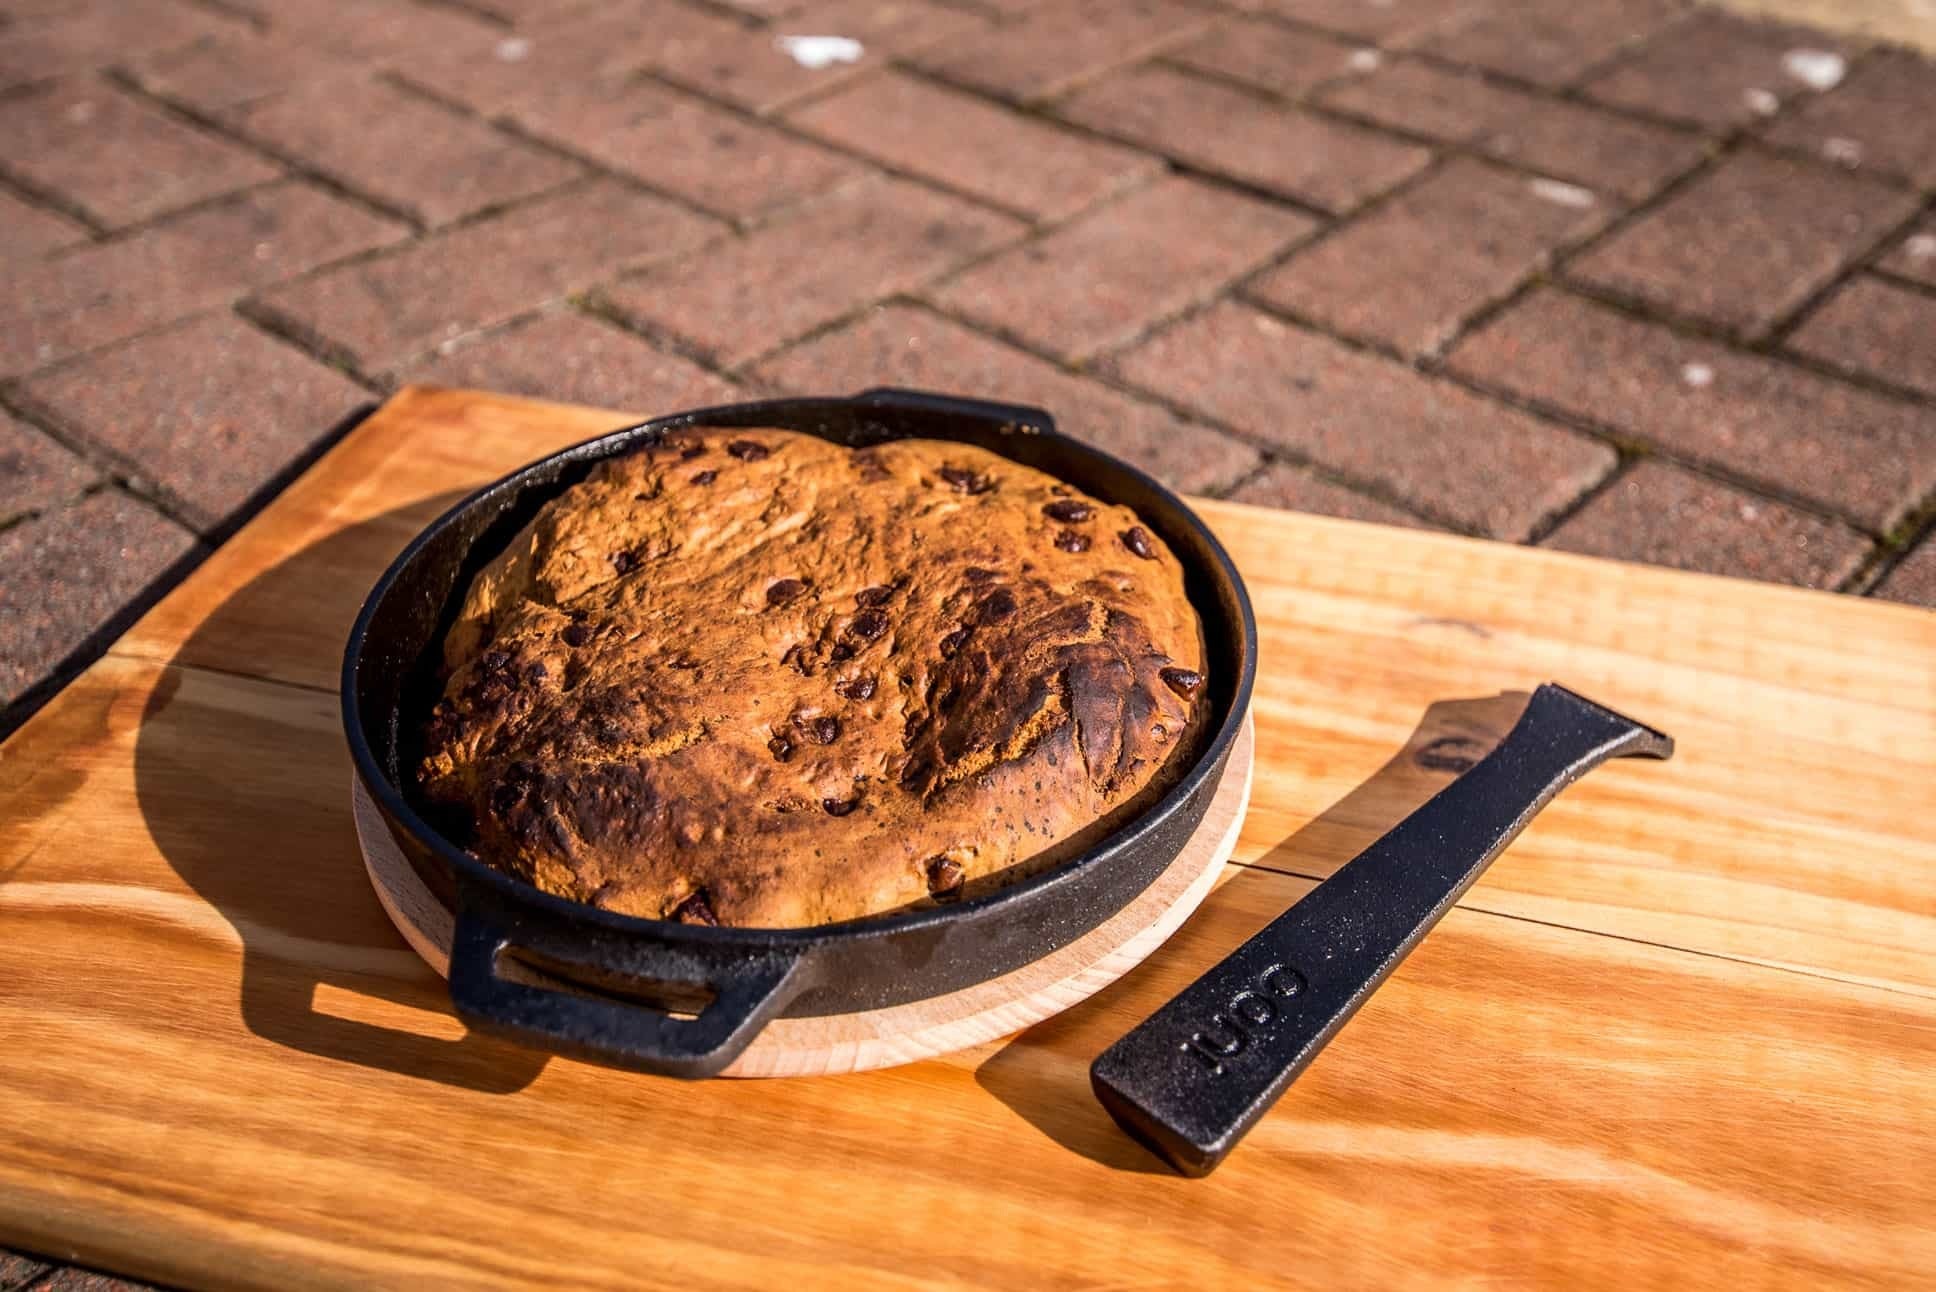 Baked Skillet Banana Bread Featured Image